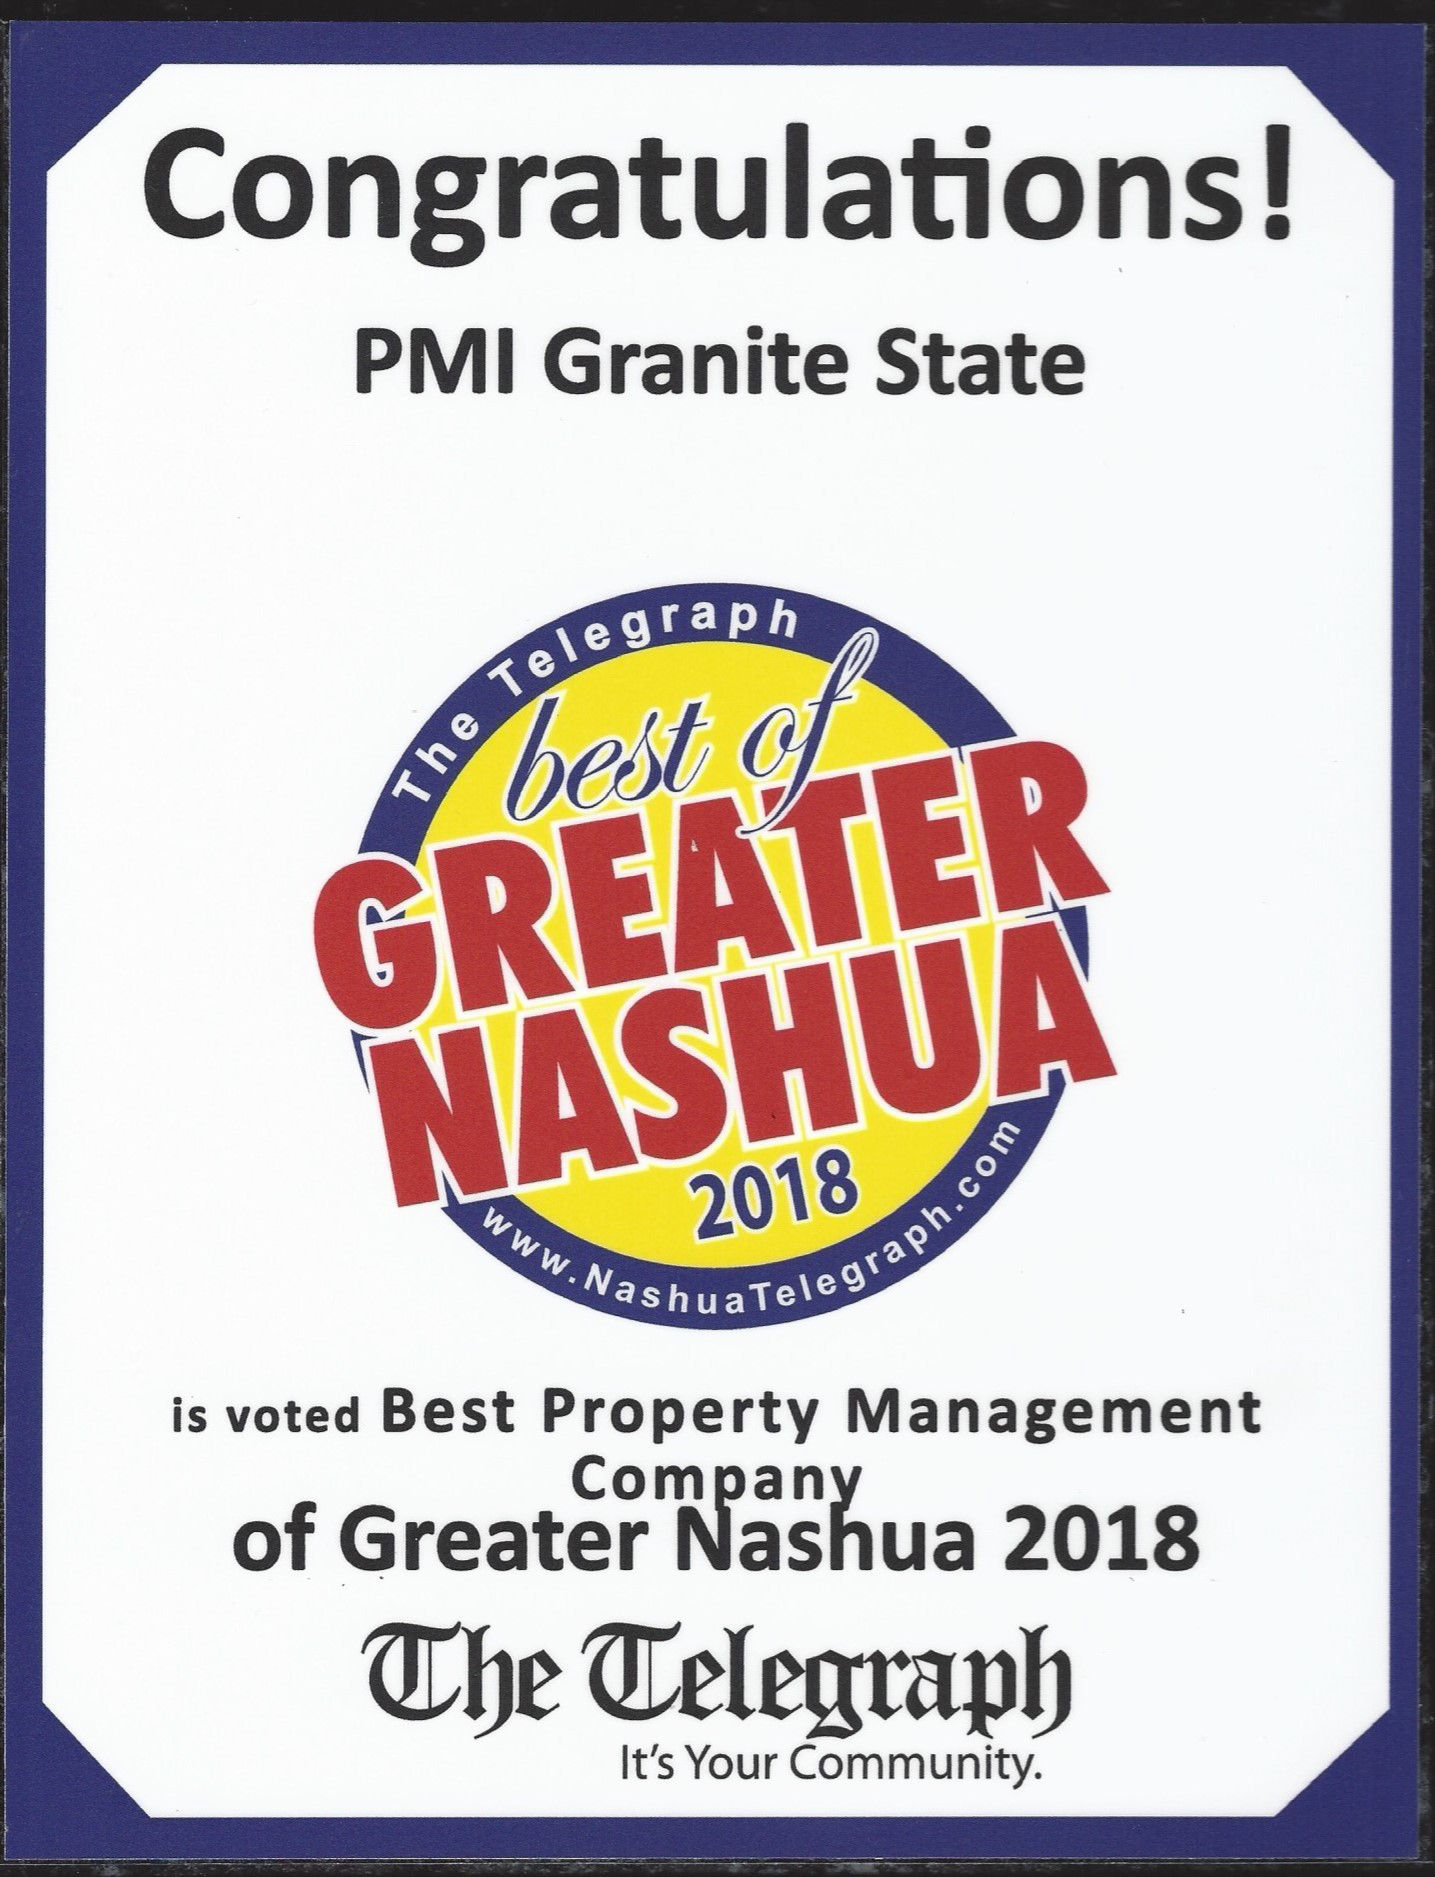 Voted Best Property Management Company of Greater Nashua 2018